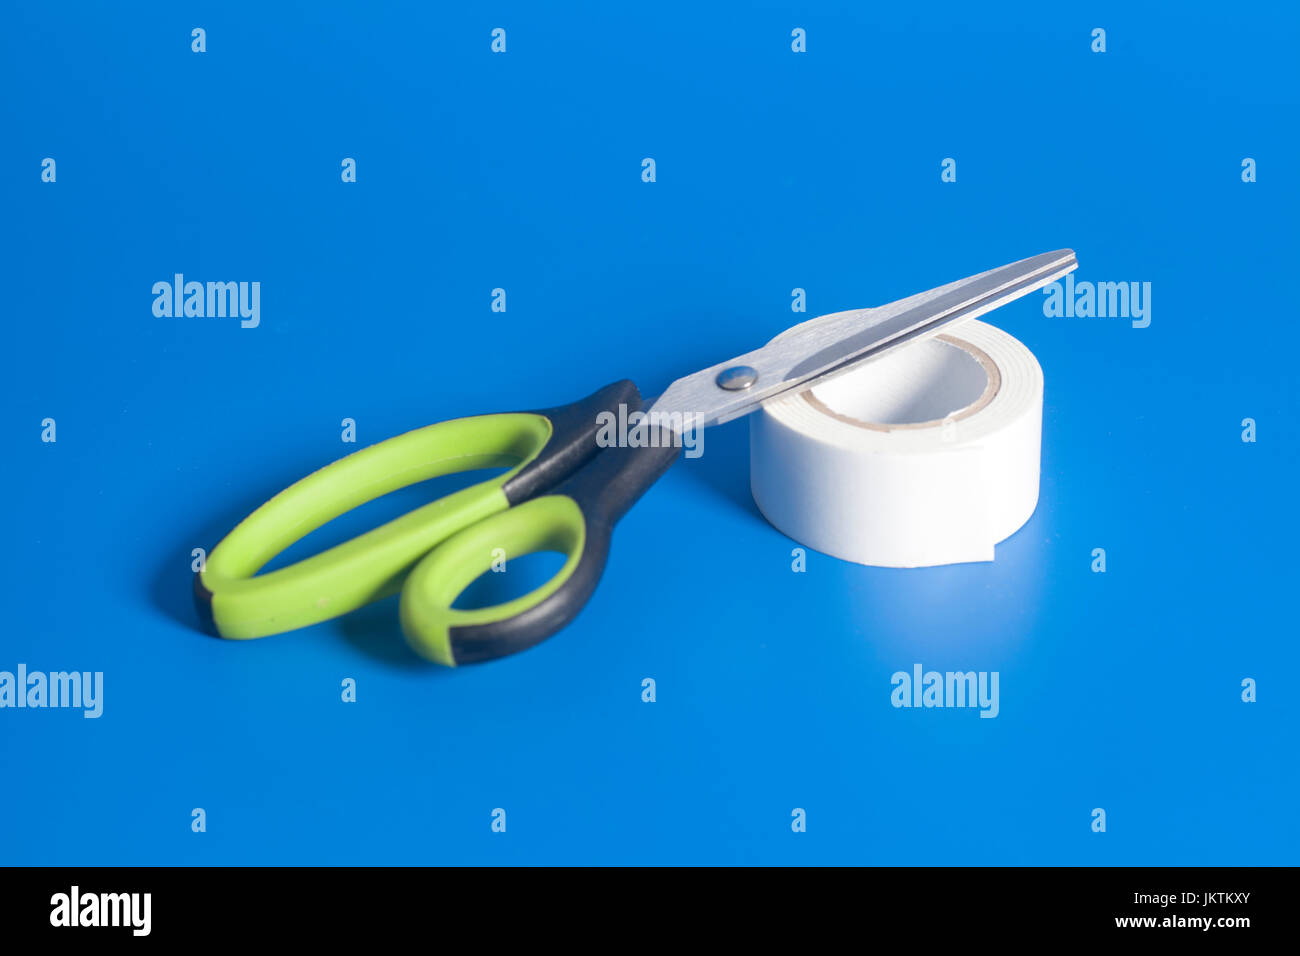 Scissors And Roll Of Duct Tape on blue background Stock Photo